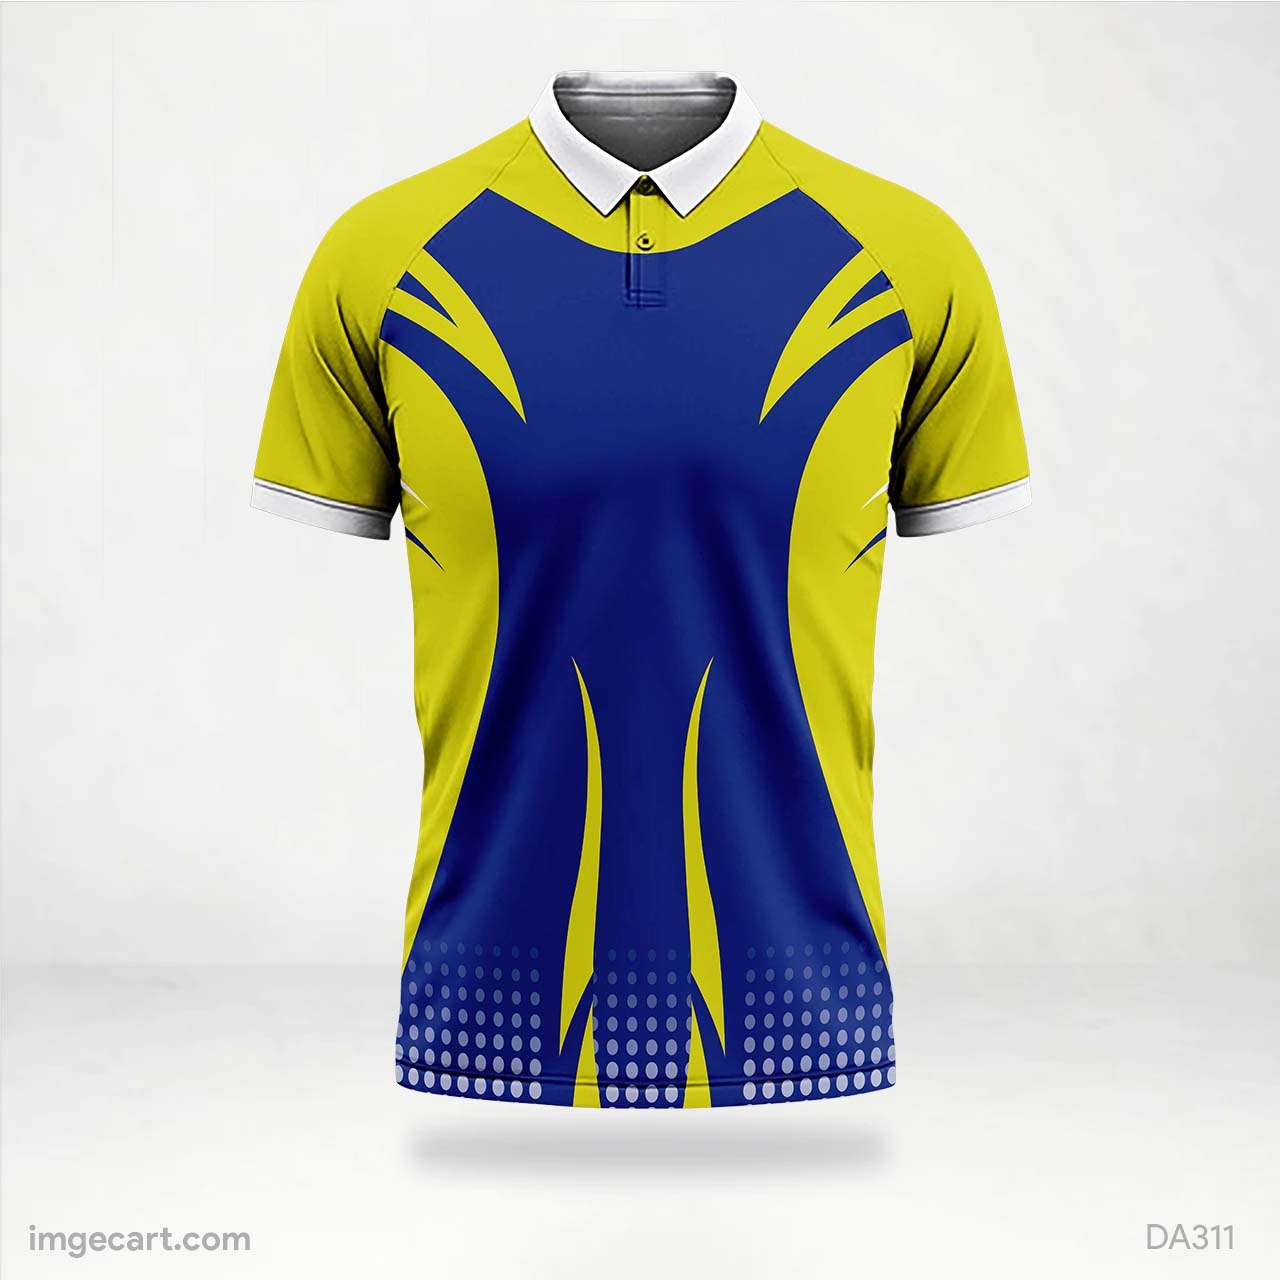 Cricket jersey yellow with Blue Pattern - imgecart